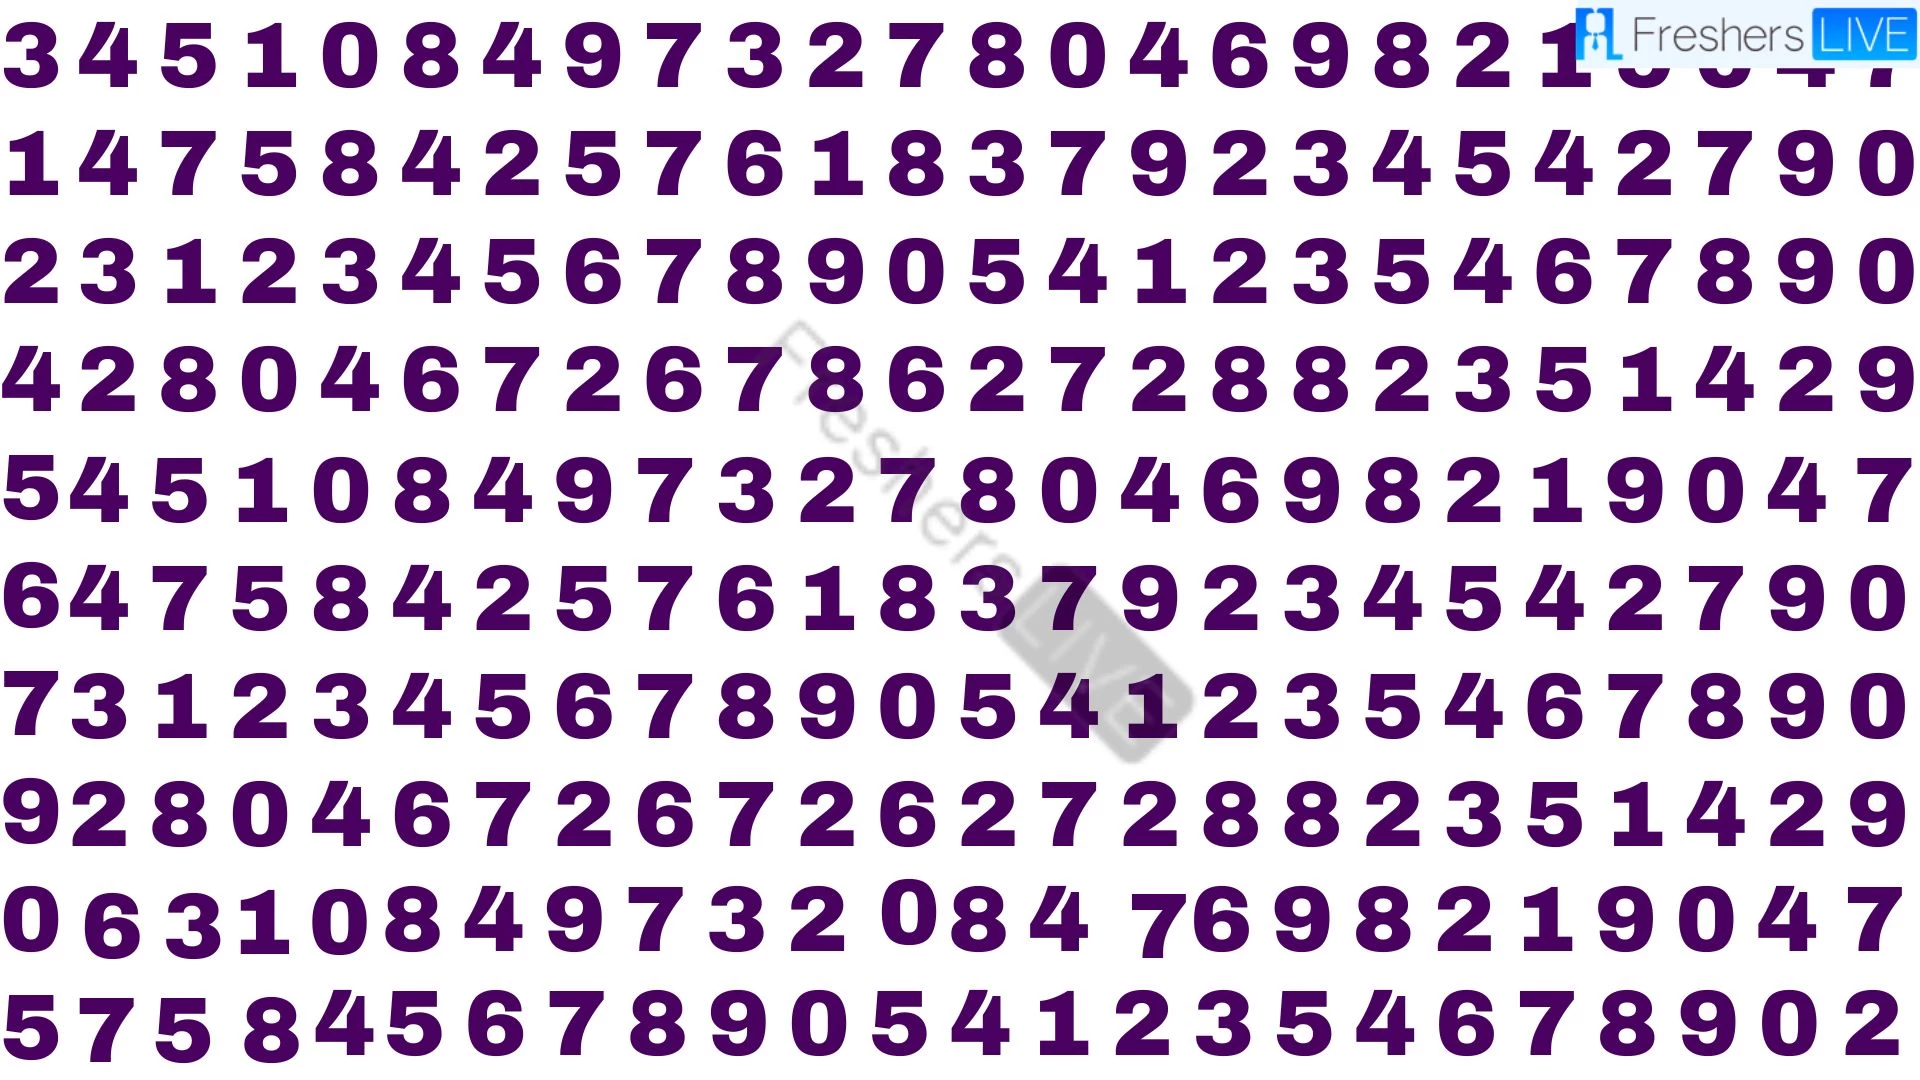 Only 20% of People Can Spot the Number 479 in This Image Within 10 Seconds